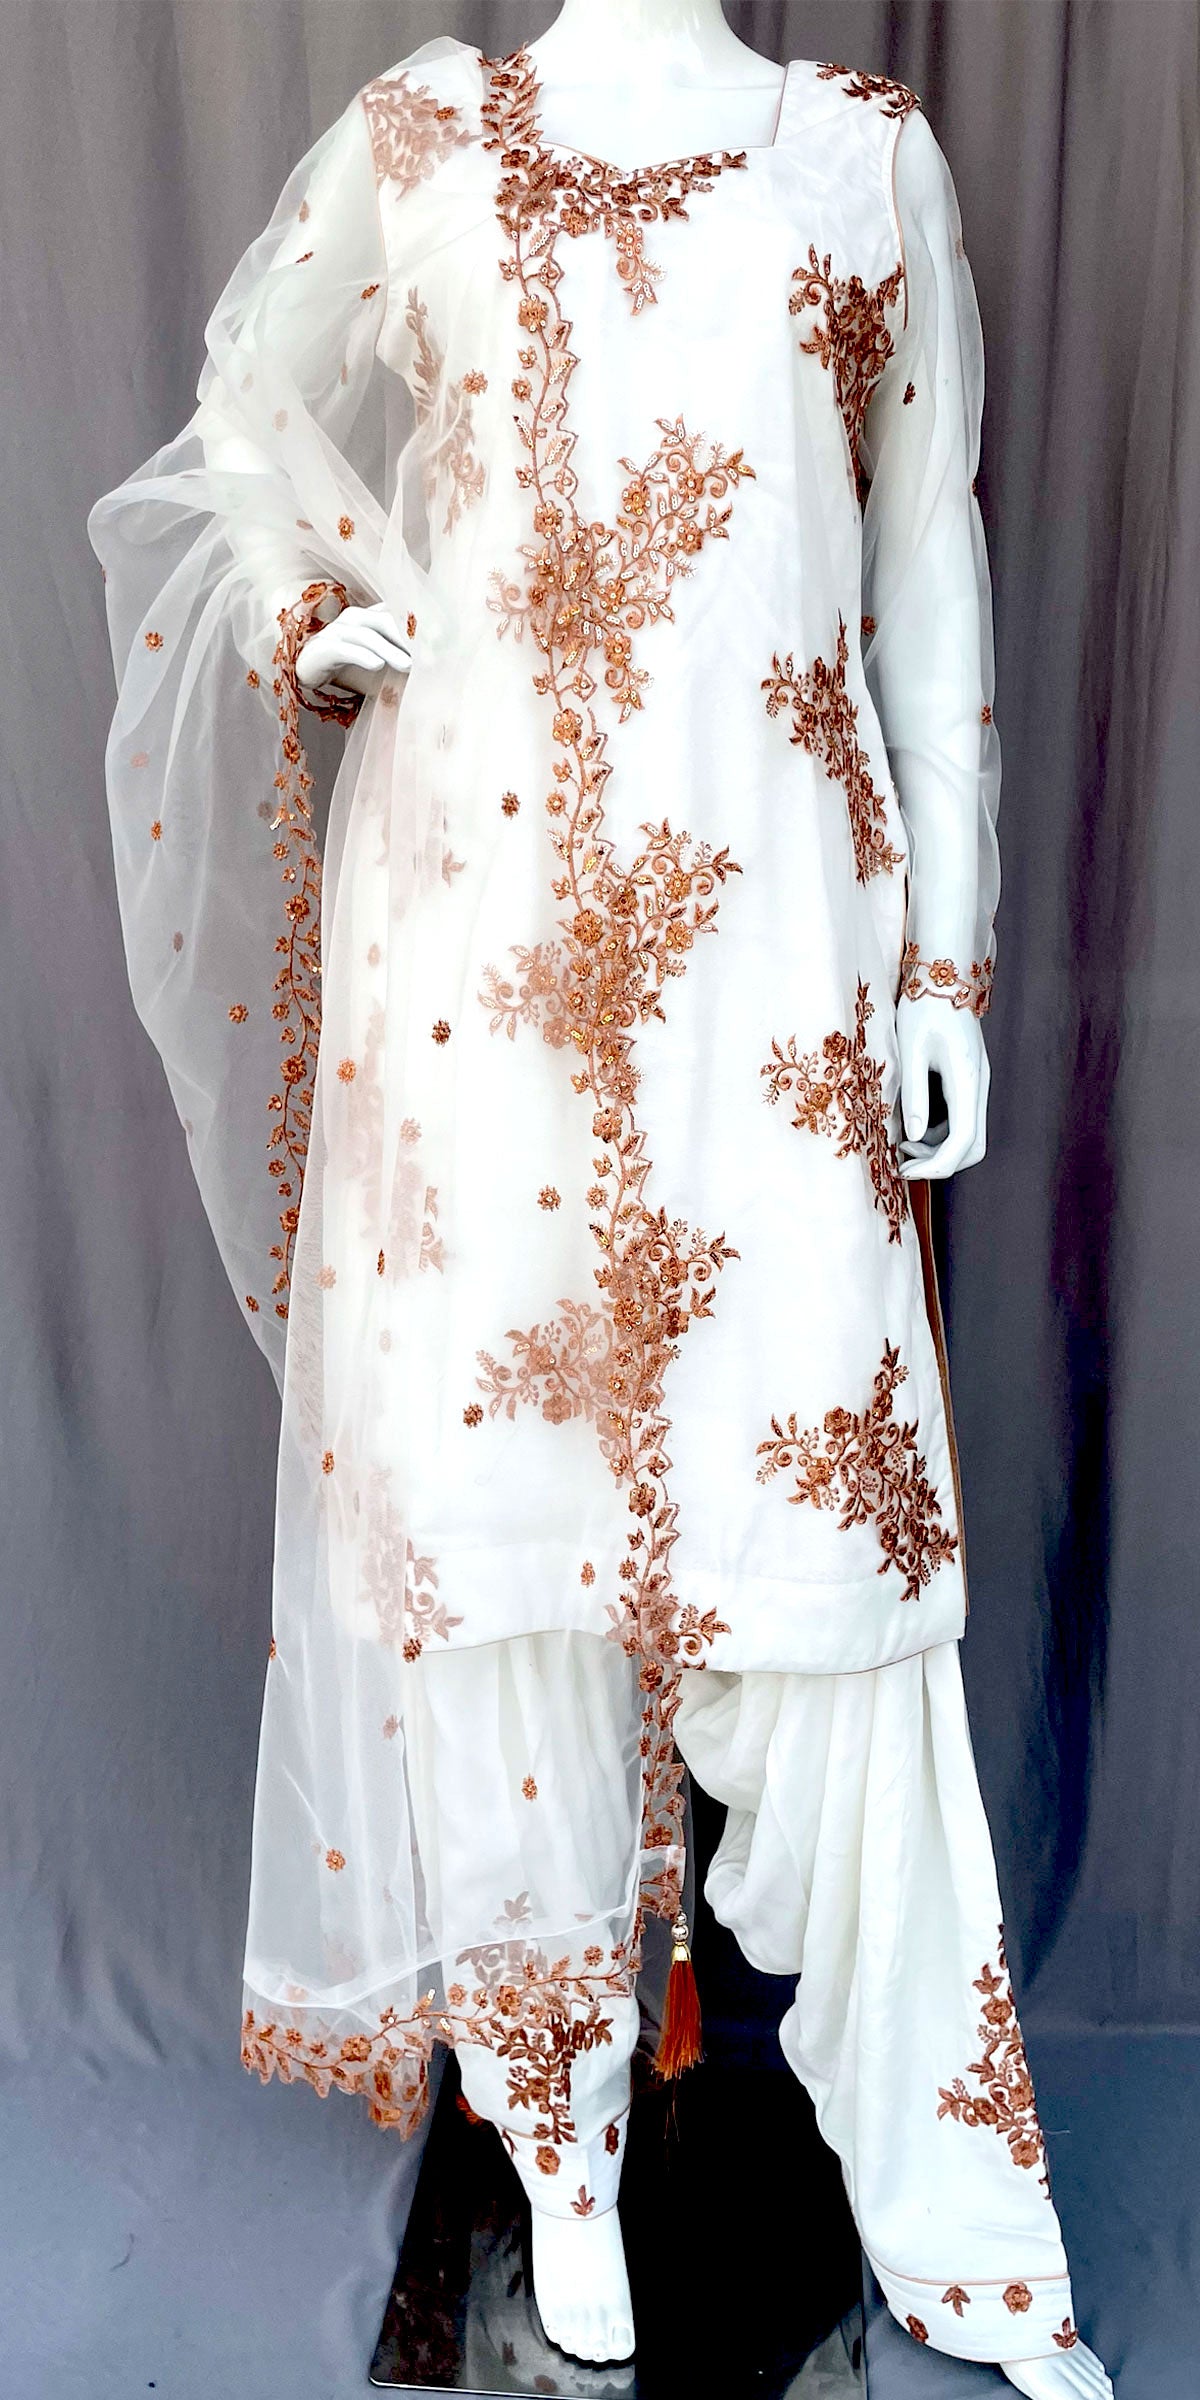 White embroidered Patiala Salwar Suit, Floral Patiala salwar suit, Party wear Indian Suit, Partywear Punjabi Salwar Suit, Full Patiala Salwar Suit, Net Salwar Suit, Fancy Punjabi Suit